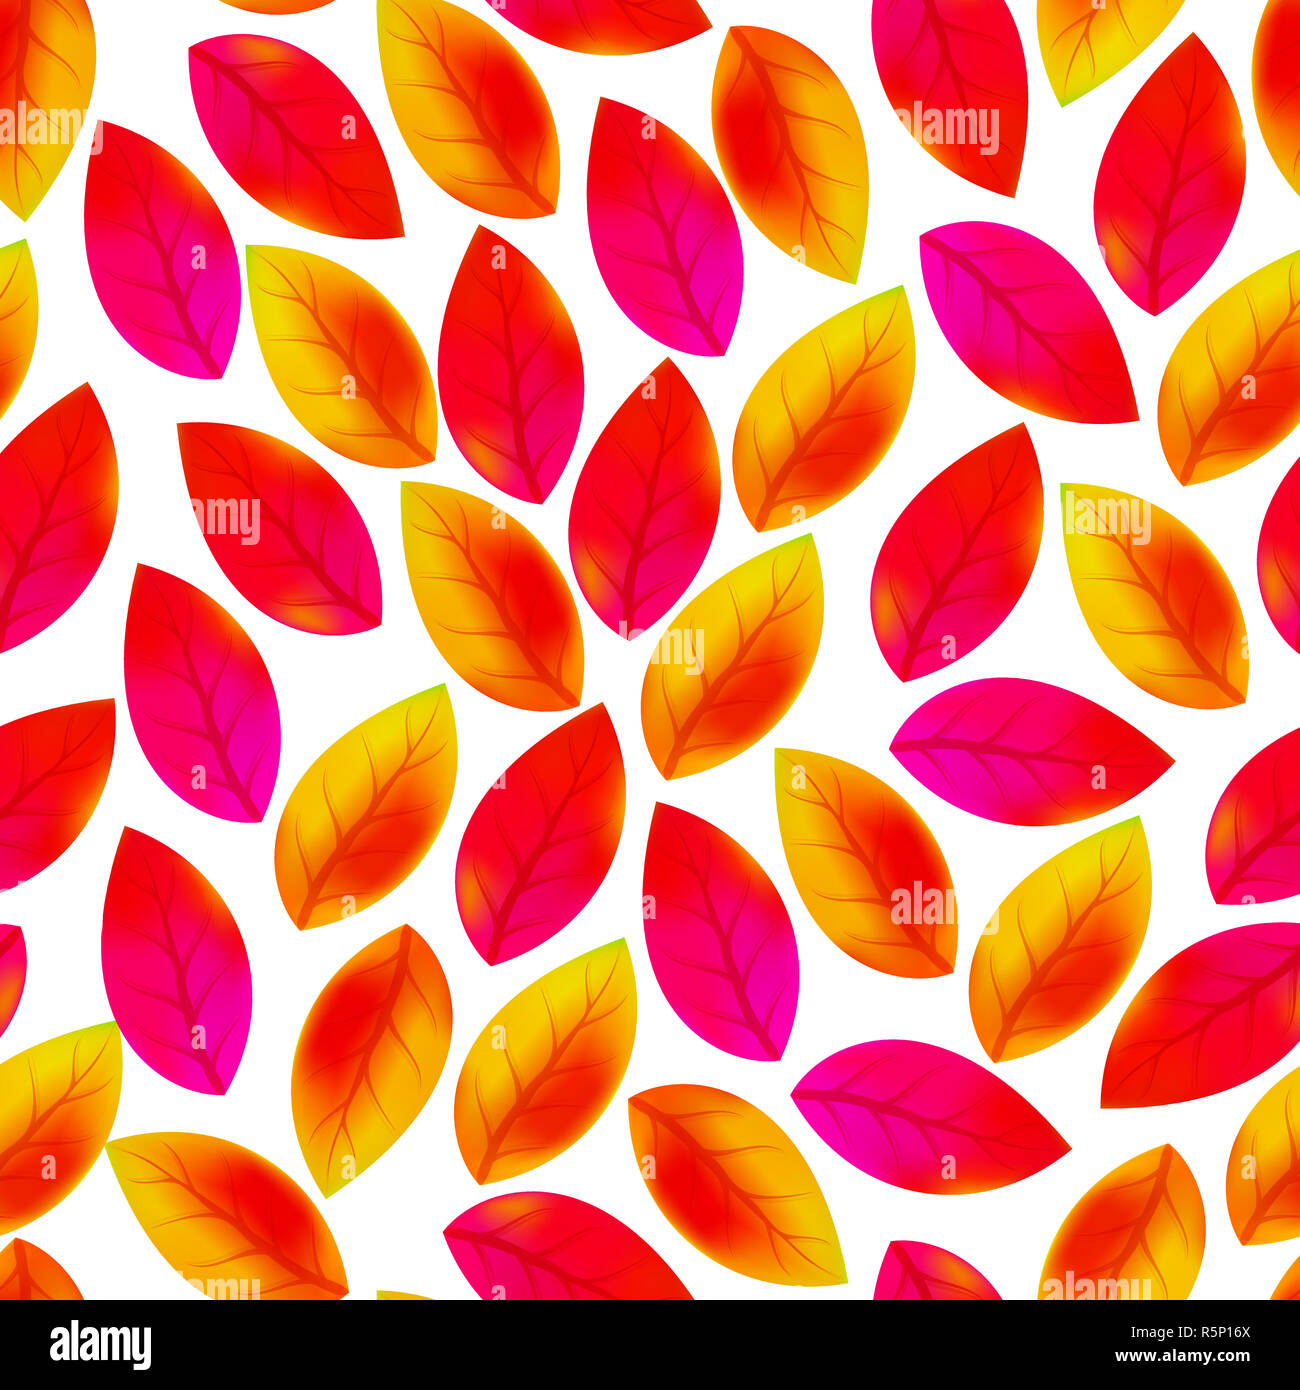 Floral seamless pattern with fallen leaves. Autumn. Leaf fall. Colorful artistic background Stock Photo